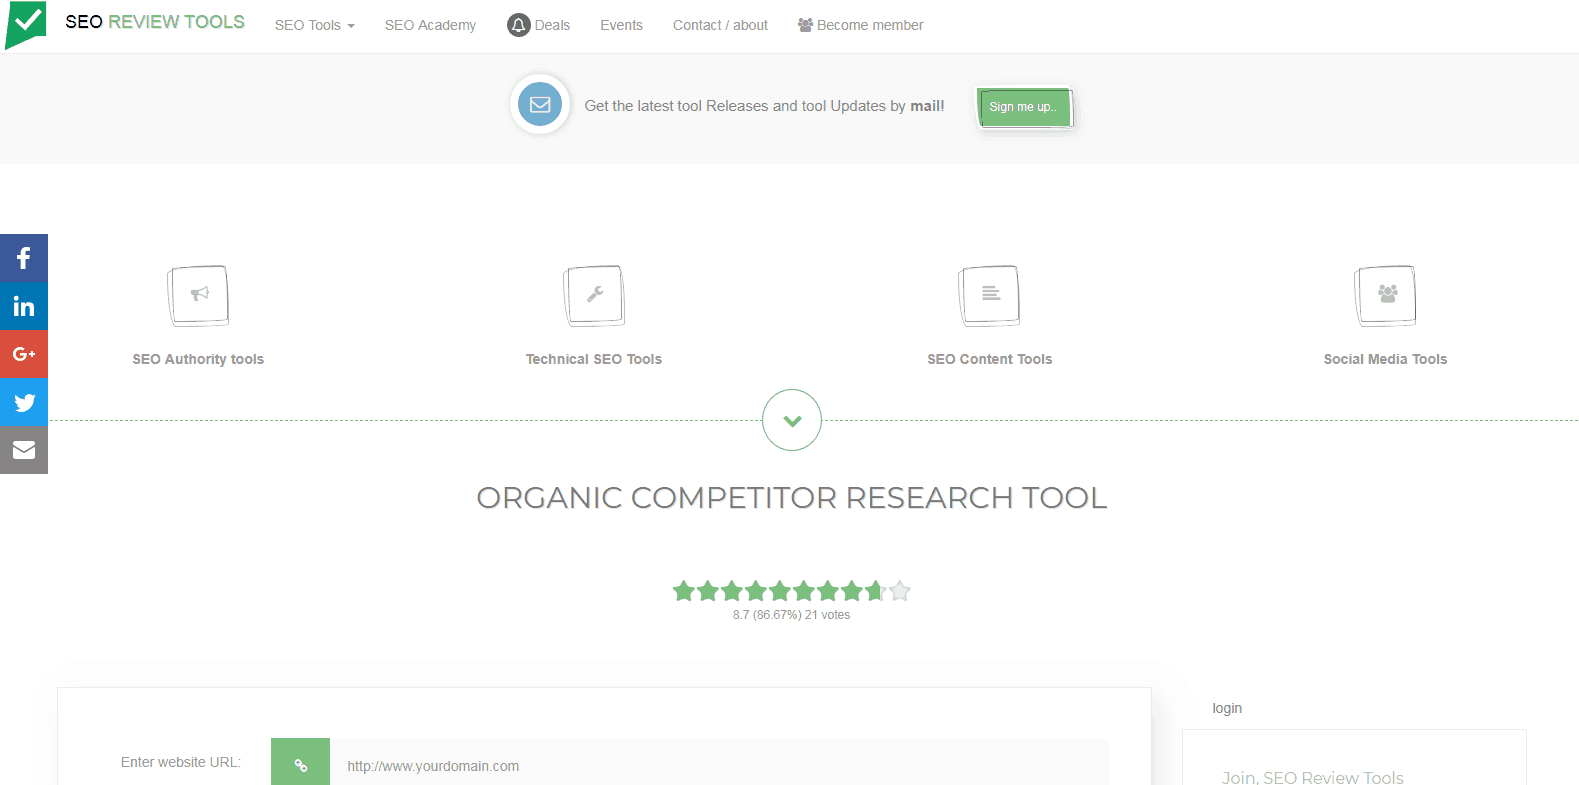 seo review tools competitor analysis tool